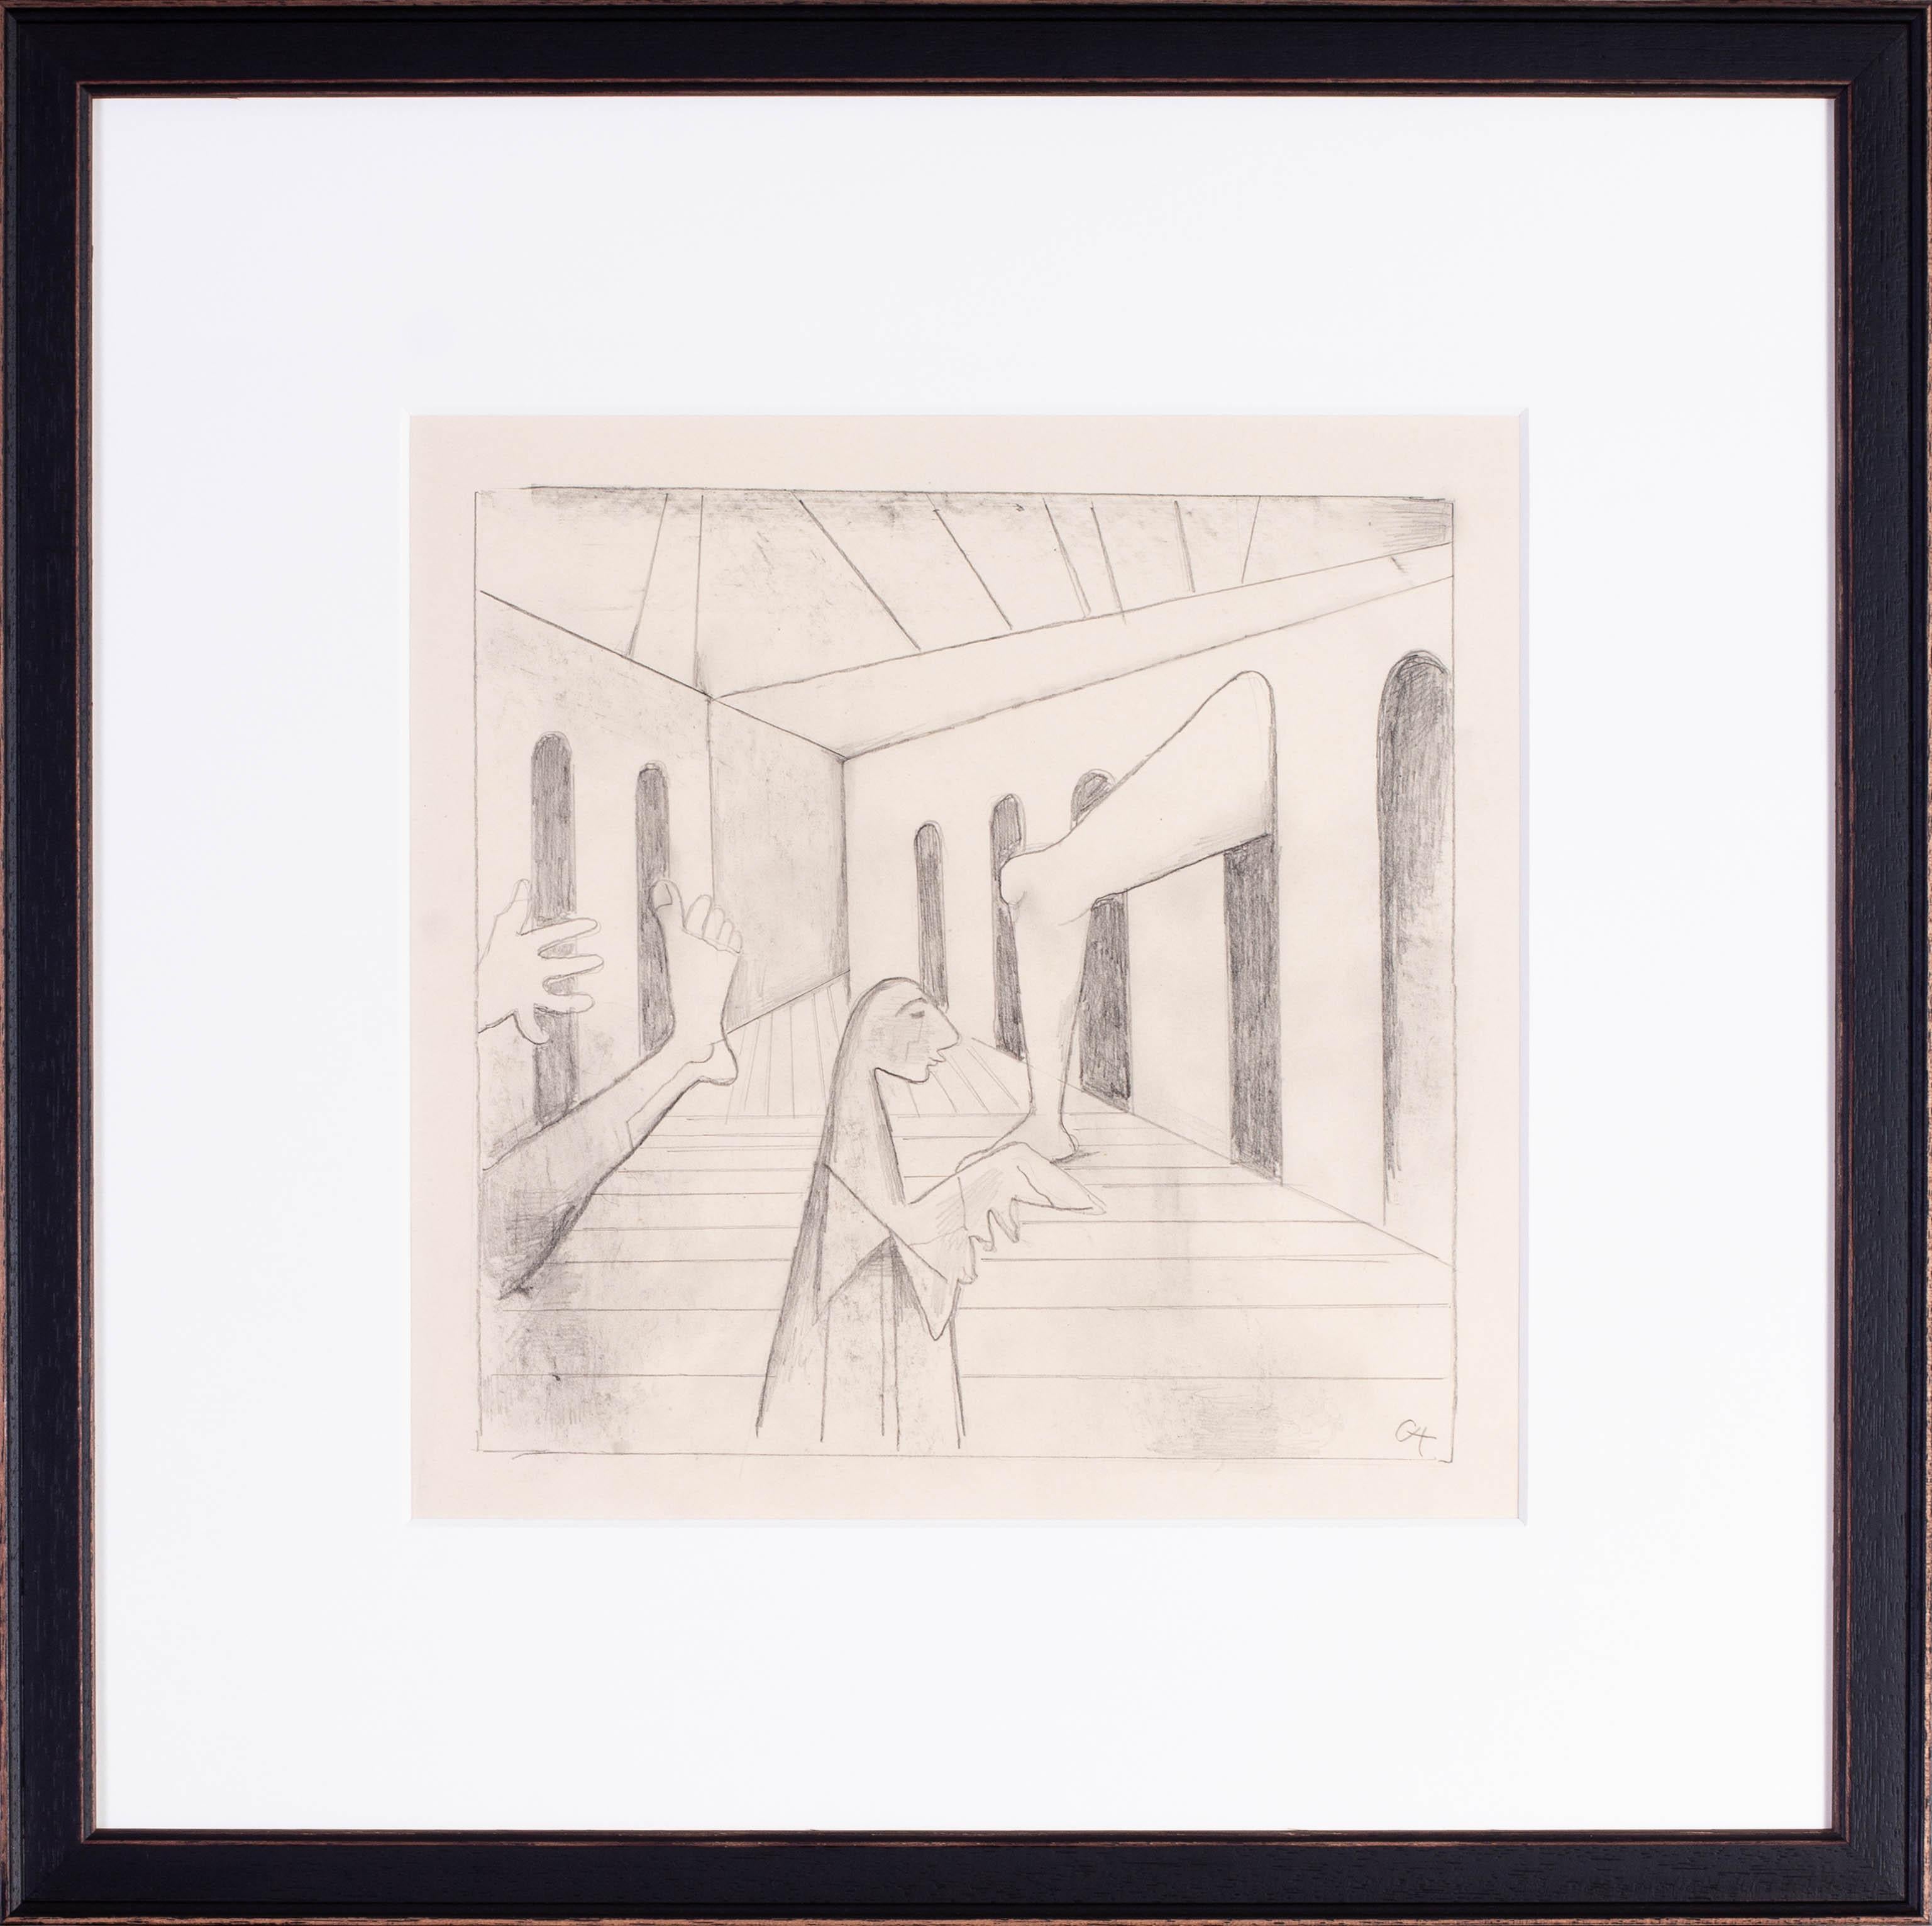 20th Century German Expressionist drawing by Carl Hofer